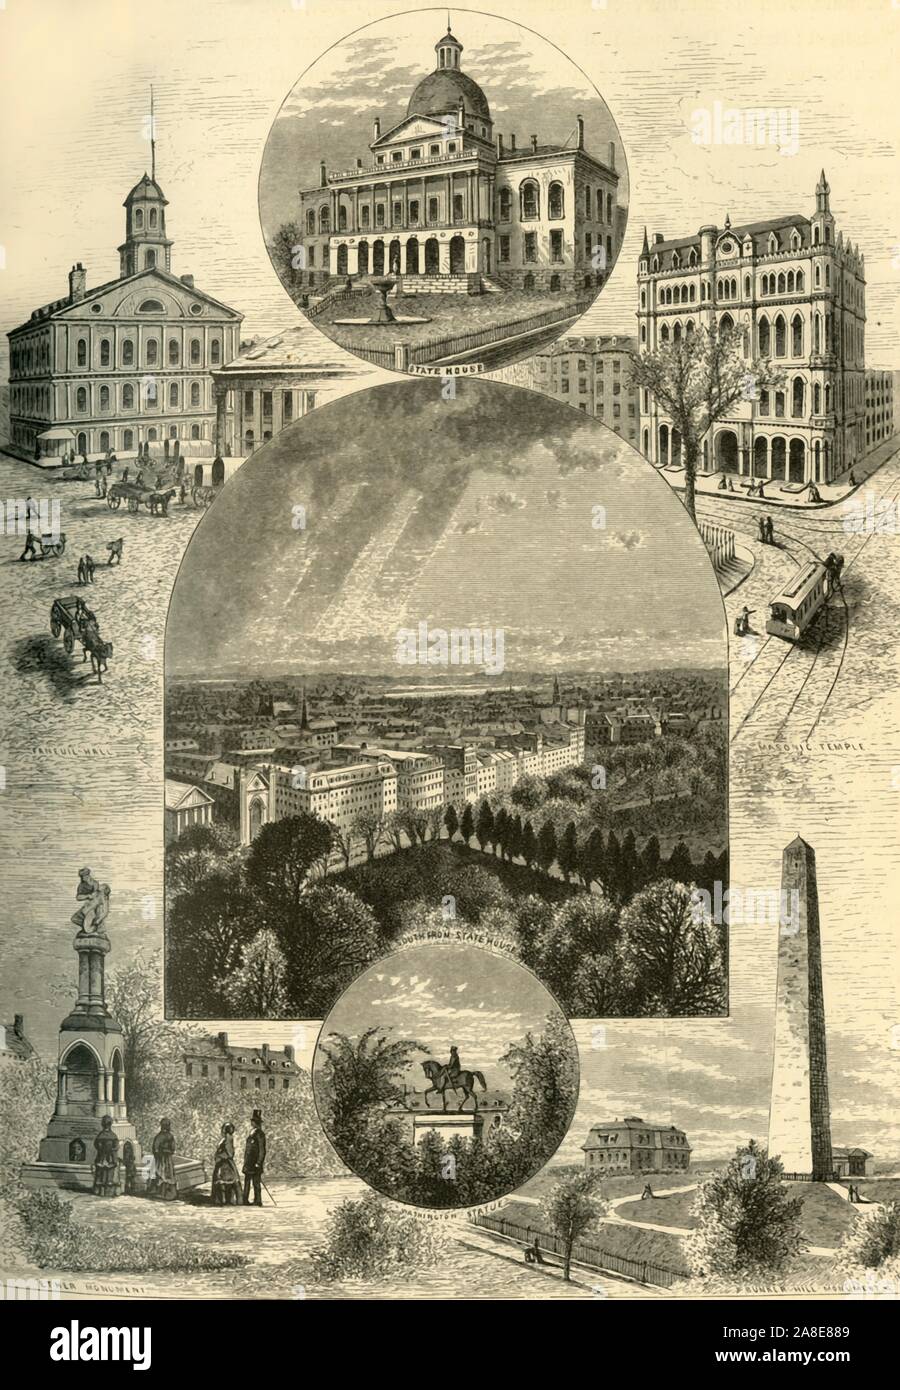 'Boston Scenes', 1874. 'Faneuil Hall, State House, Masonic Temple, [view] South from State House, Ether Monument, Washington Statue, Bunker Hill Monument', Boston, Massachusetts, USA. From &quot;Picturesque America; or, The Land We Live In, A Delineation by Pen and Pencil of the Mountains, Rivers, Lakes...with Illustrations on Steel and Wood by Eminent American Artists&quot; Vol. II, edited by William Cullen Bryant. [D. Appleton and Company, New York, 1874] Stock Photo